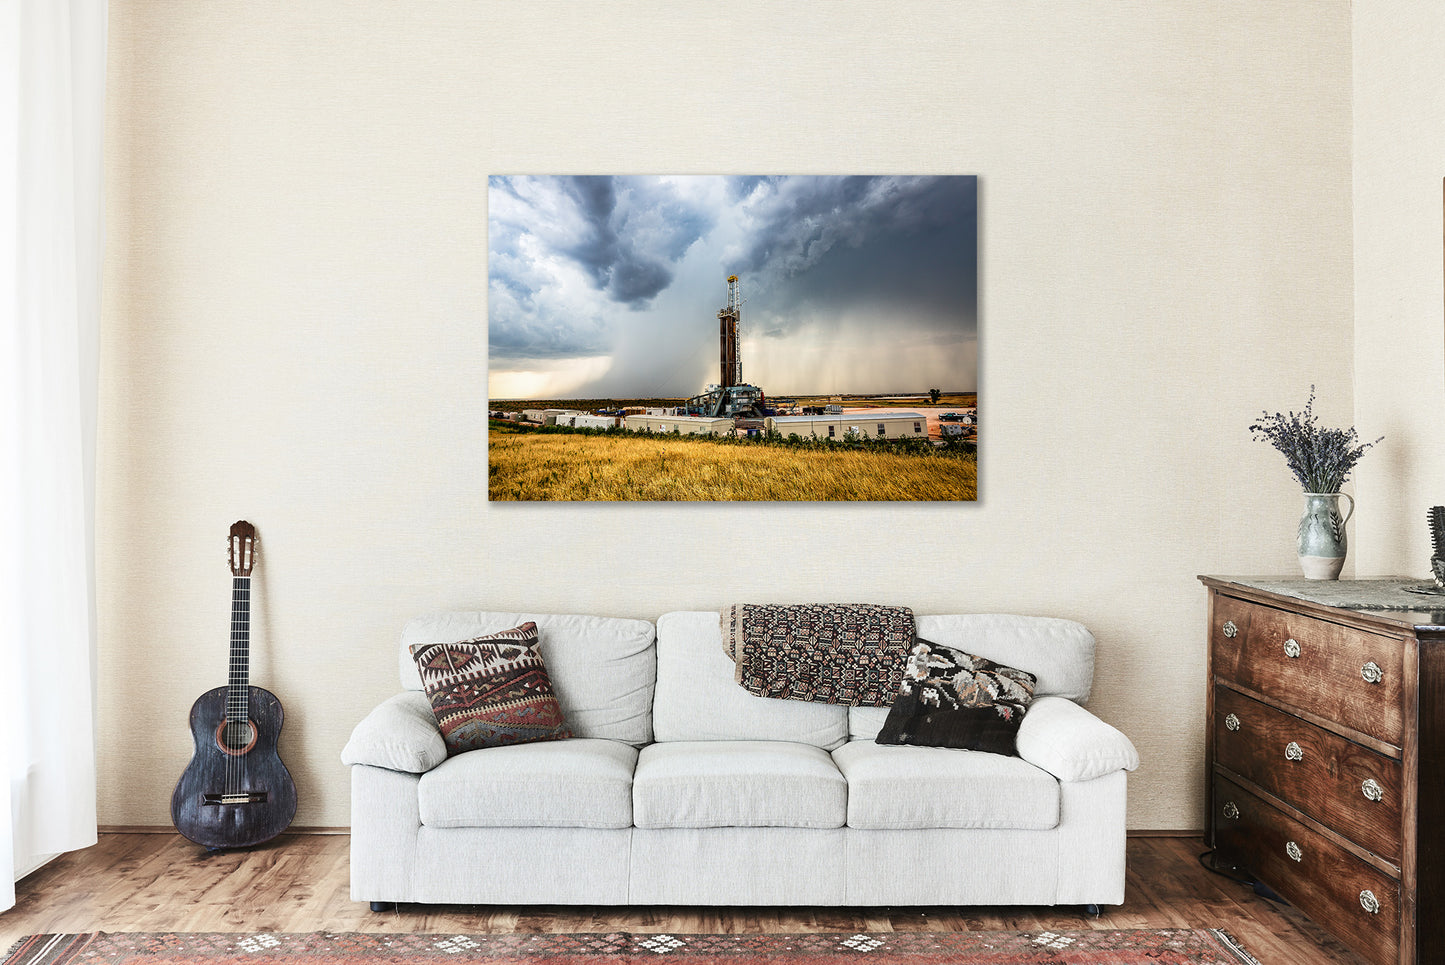 Oilfield Canvas Wall Art (Ready to Hang) Gallery Wrap of Drilling Rig and Storm on Summer Day in Oklahoma Thunderstorm Photography Oil and Gas Decor